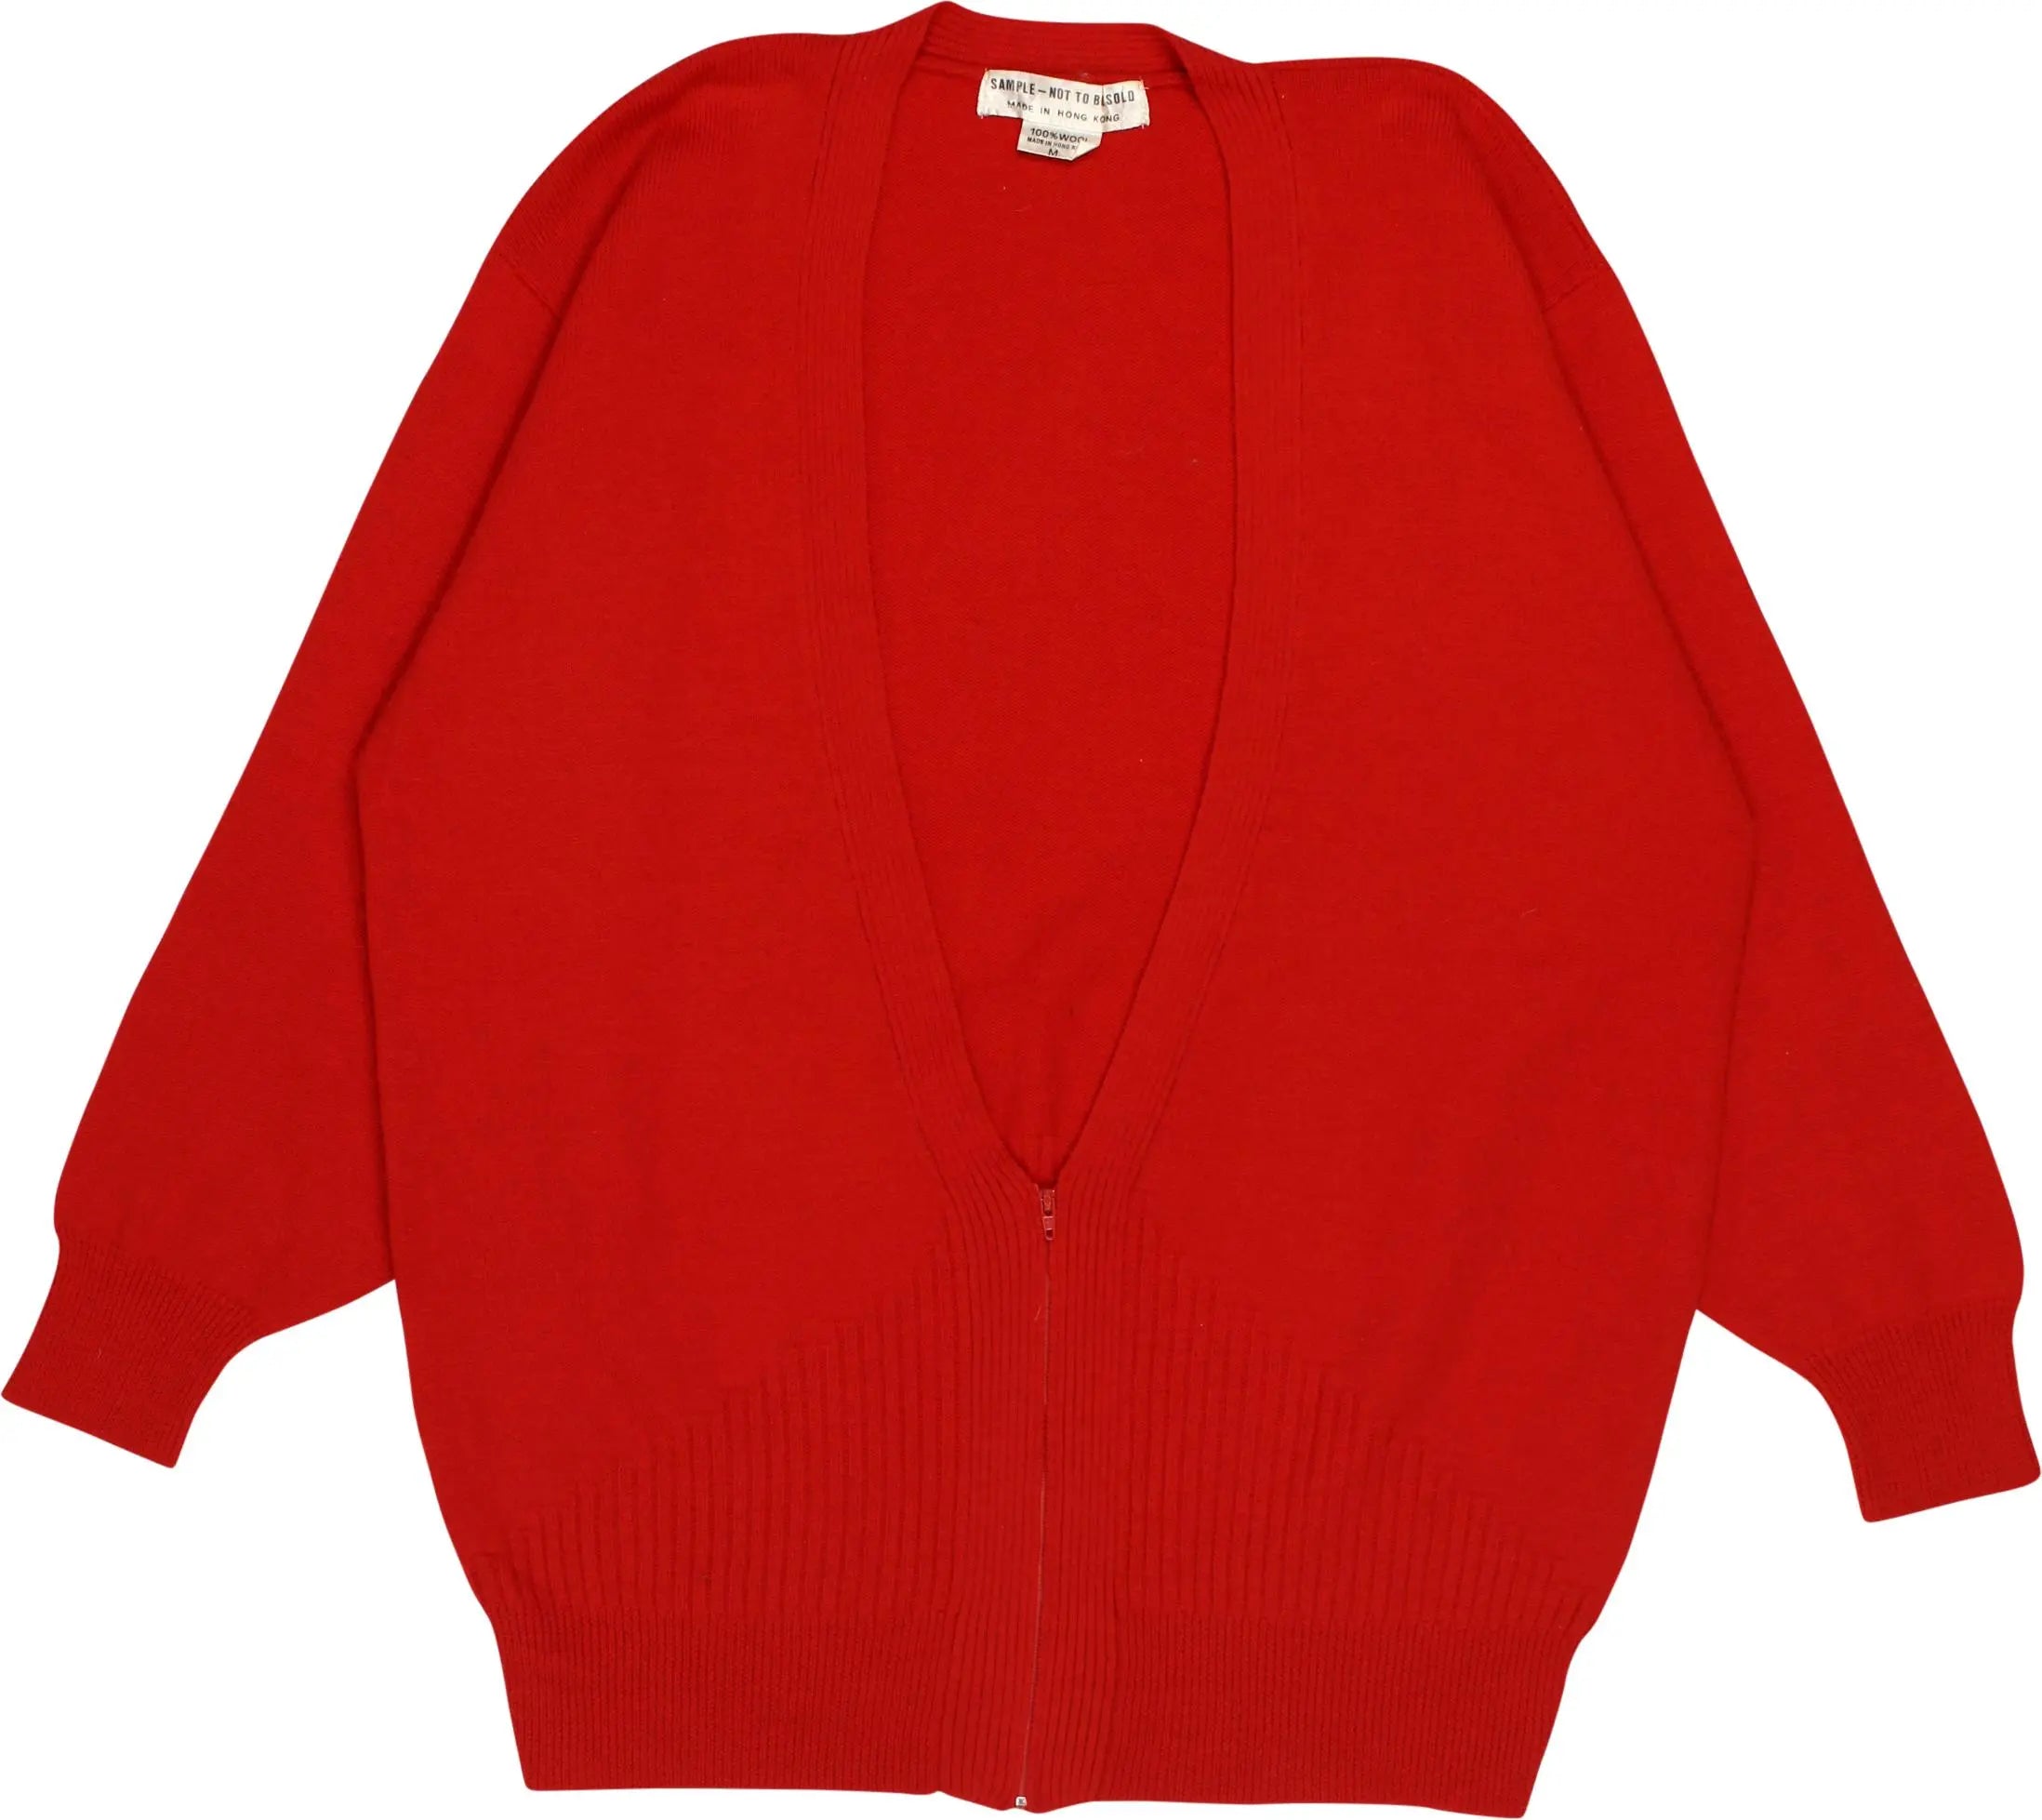 Unknown - Red Wool Cardigan- ThriftTale.com - Vintage and second handclothing